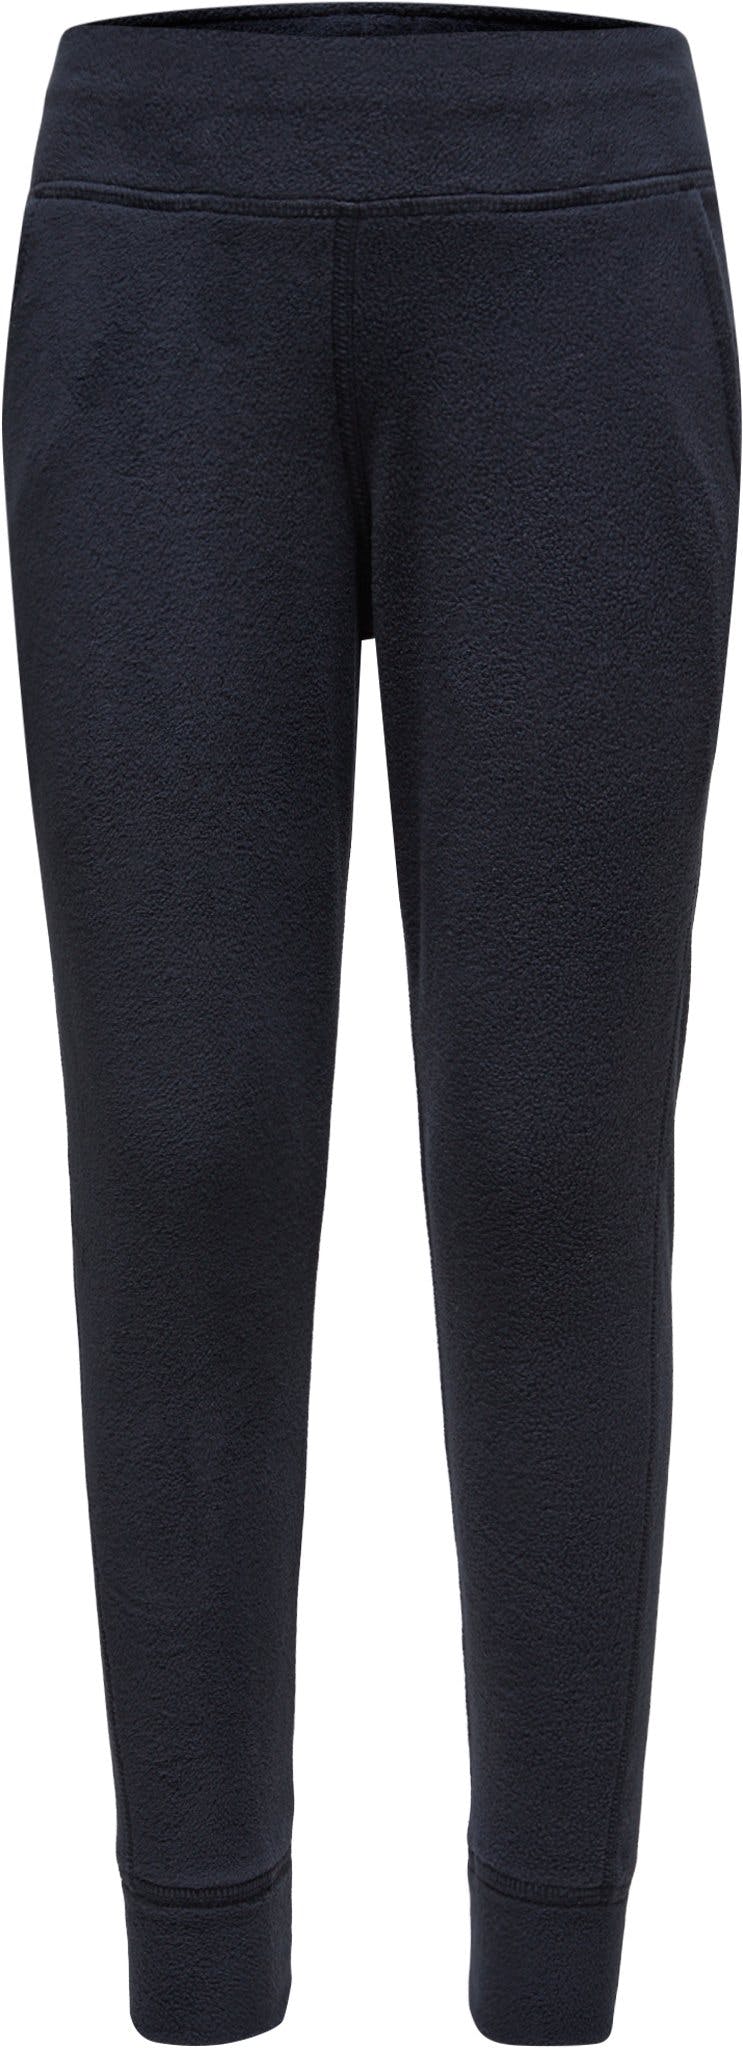 Product image for Glacial Legging - Girls